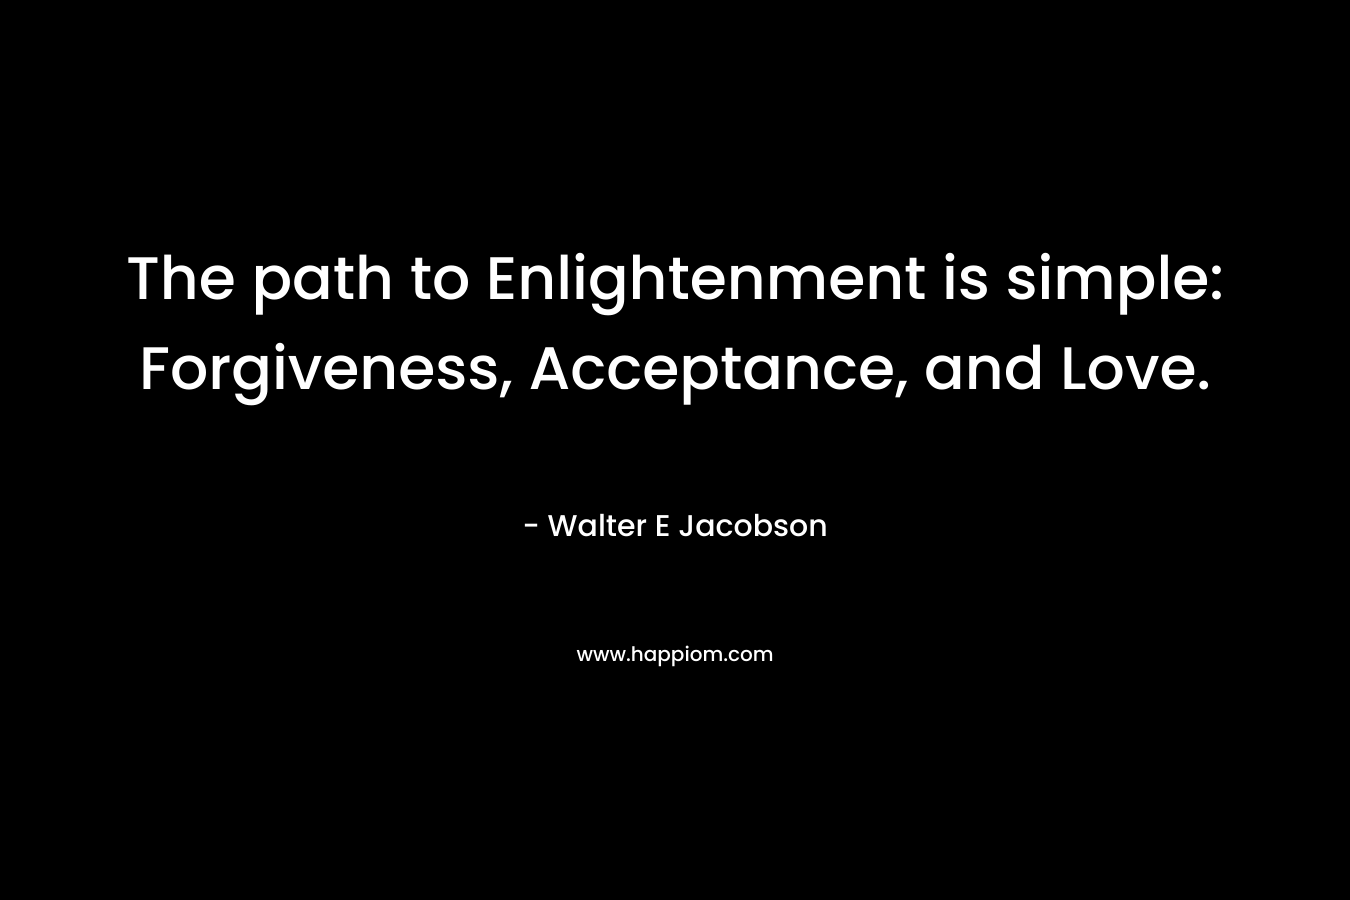 The path to Enlightenment is simple: Forgiveness, Acceptance, and Love.